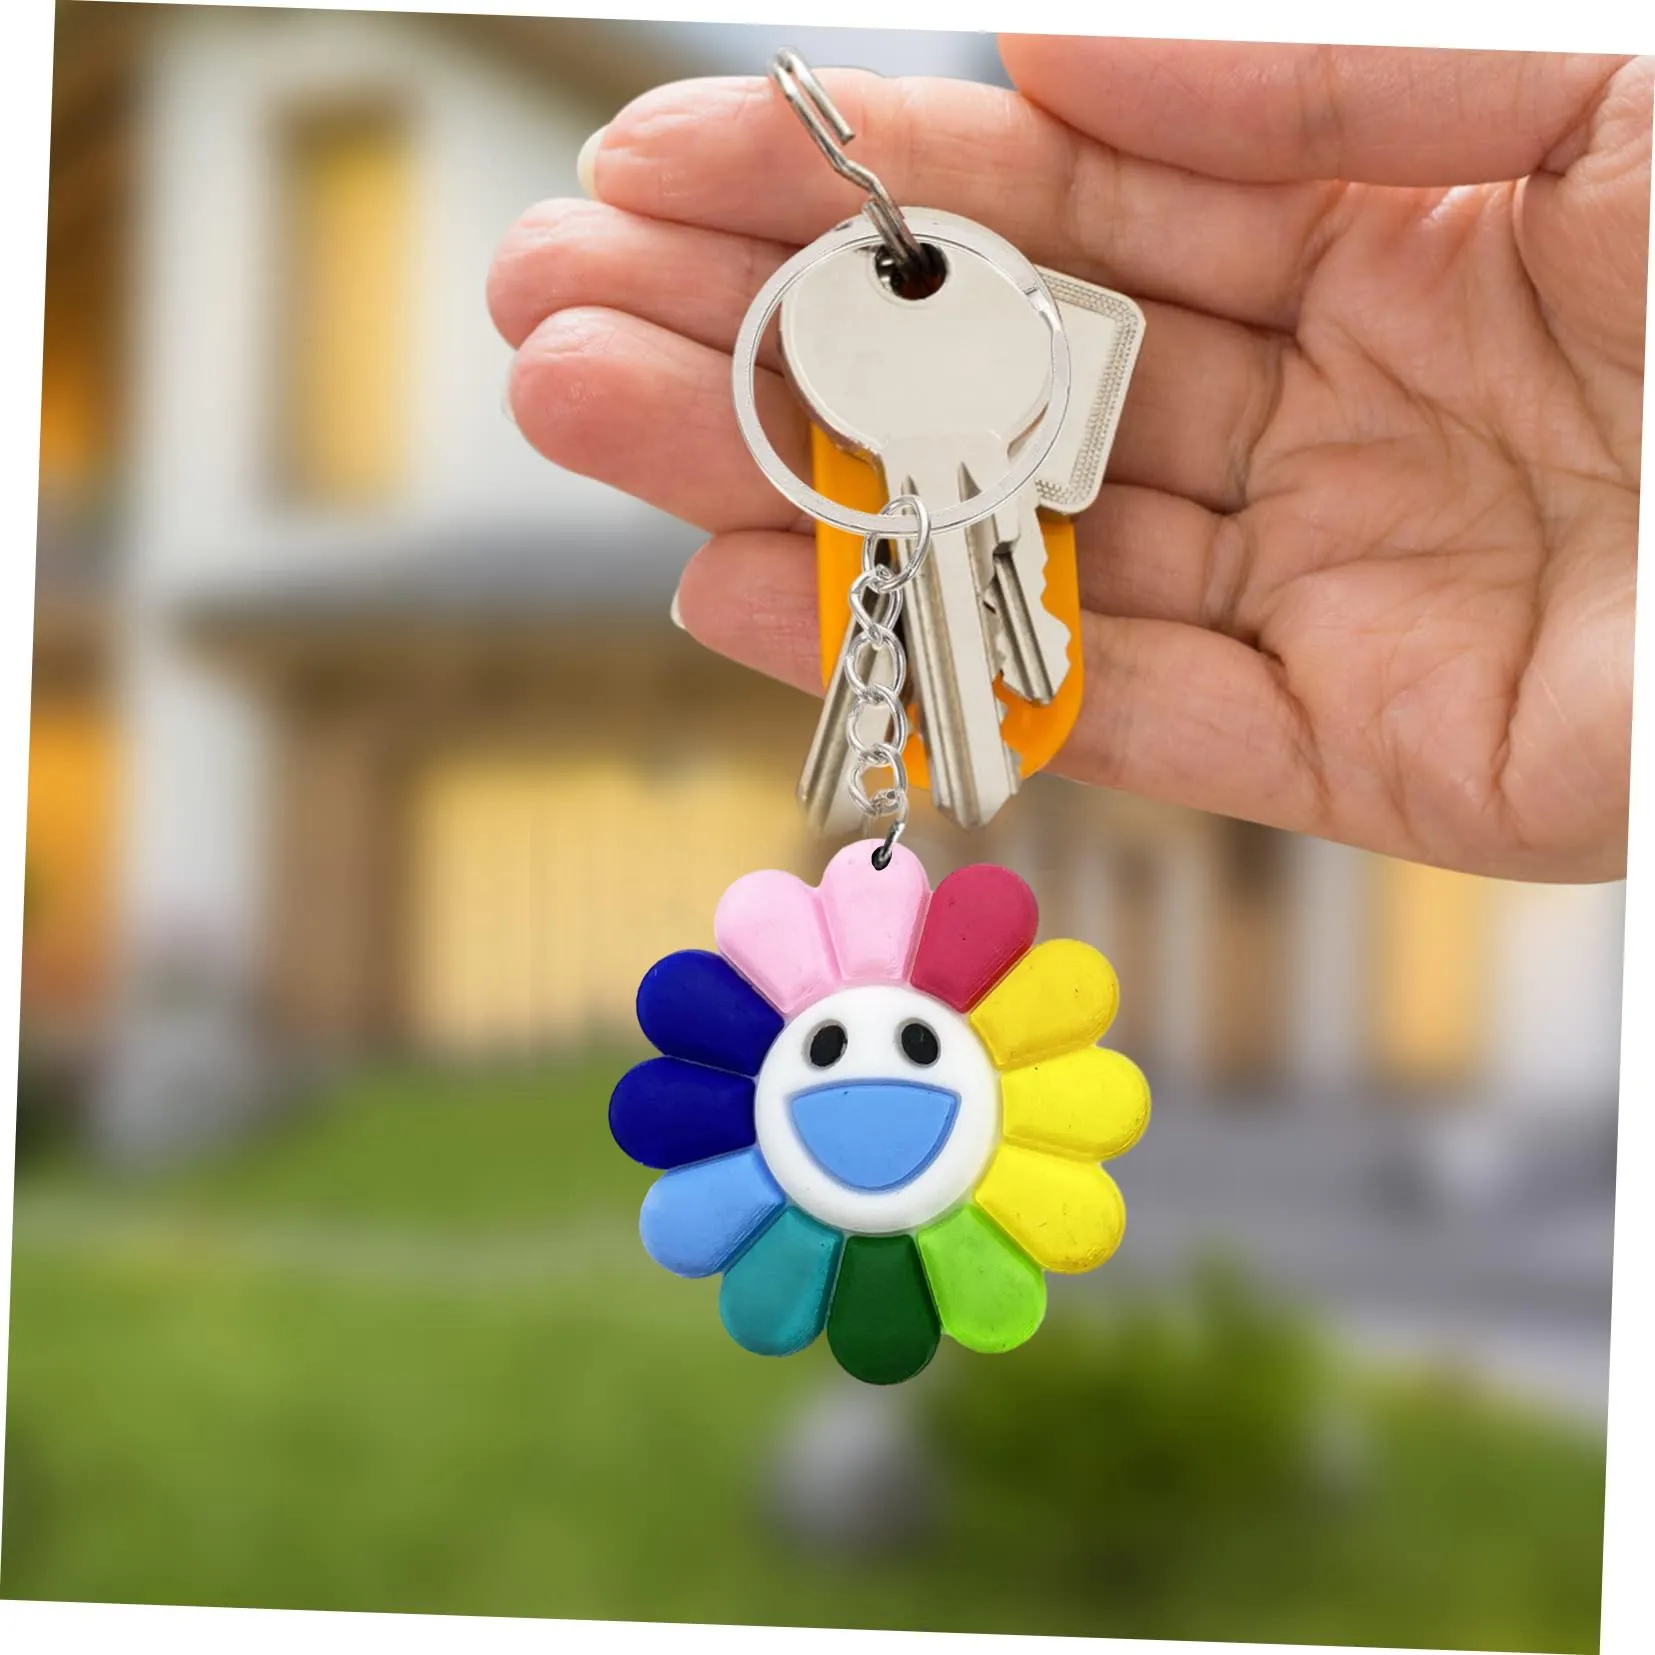 sunflower 30 keychain keychains for school day birthday party supplies gift classroom prizes tags goodie bag stuffer christmas gifts and holiday charms keyring suitable schoolbag boys women anime cool backpacks